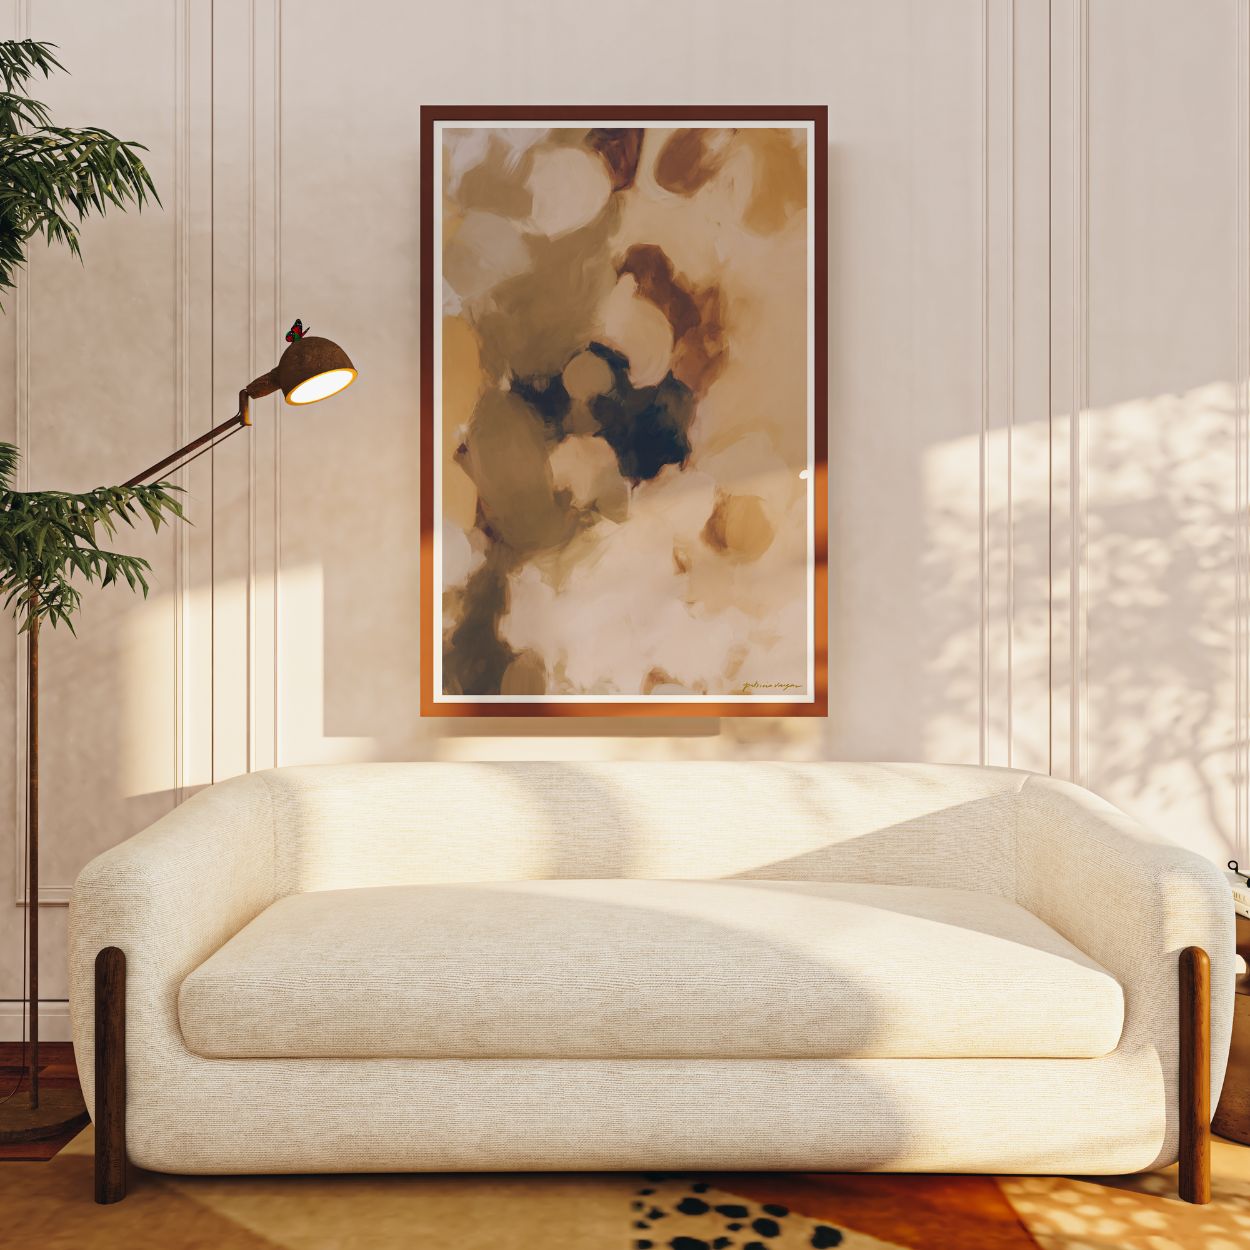 Clay, brown and tan colorful abstract wall art print by Parima Studio. Large art for over sofa in living room